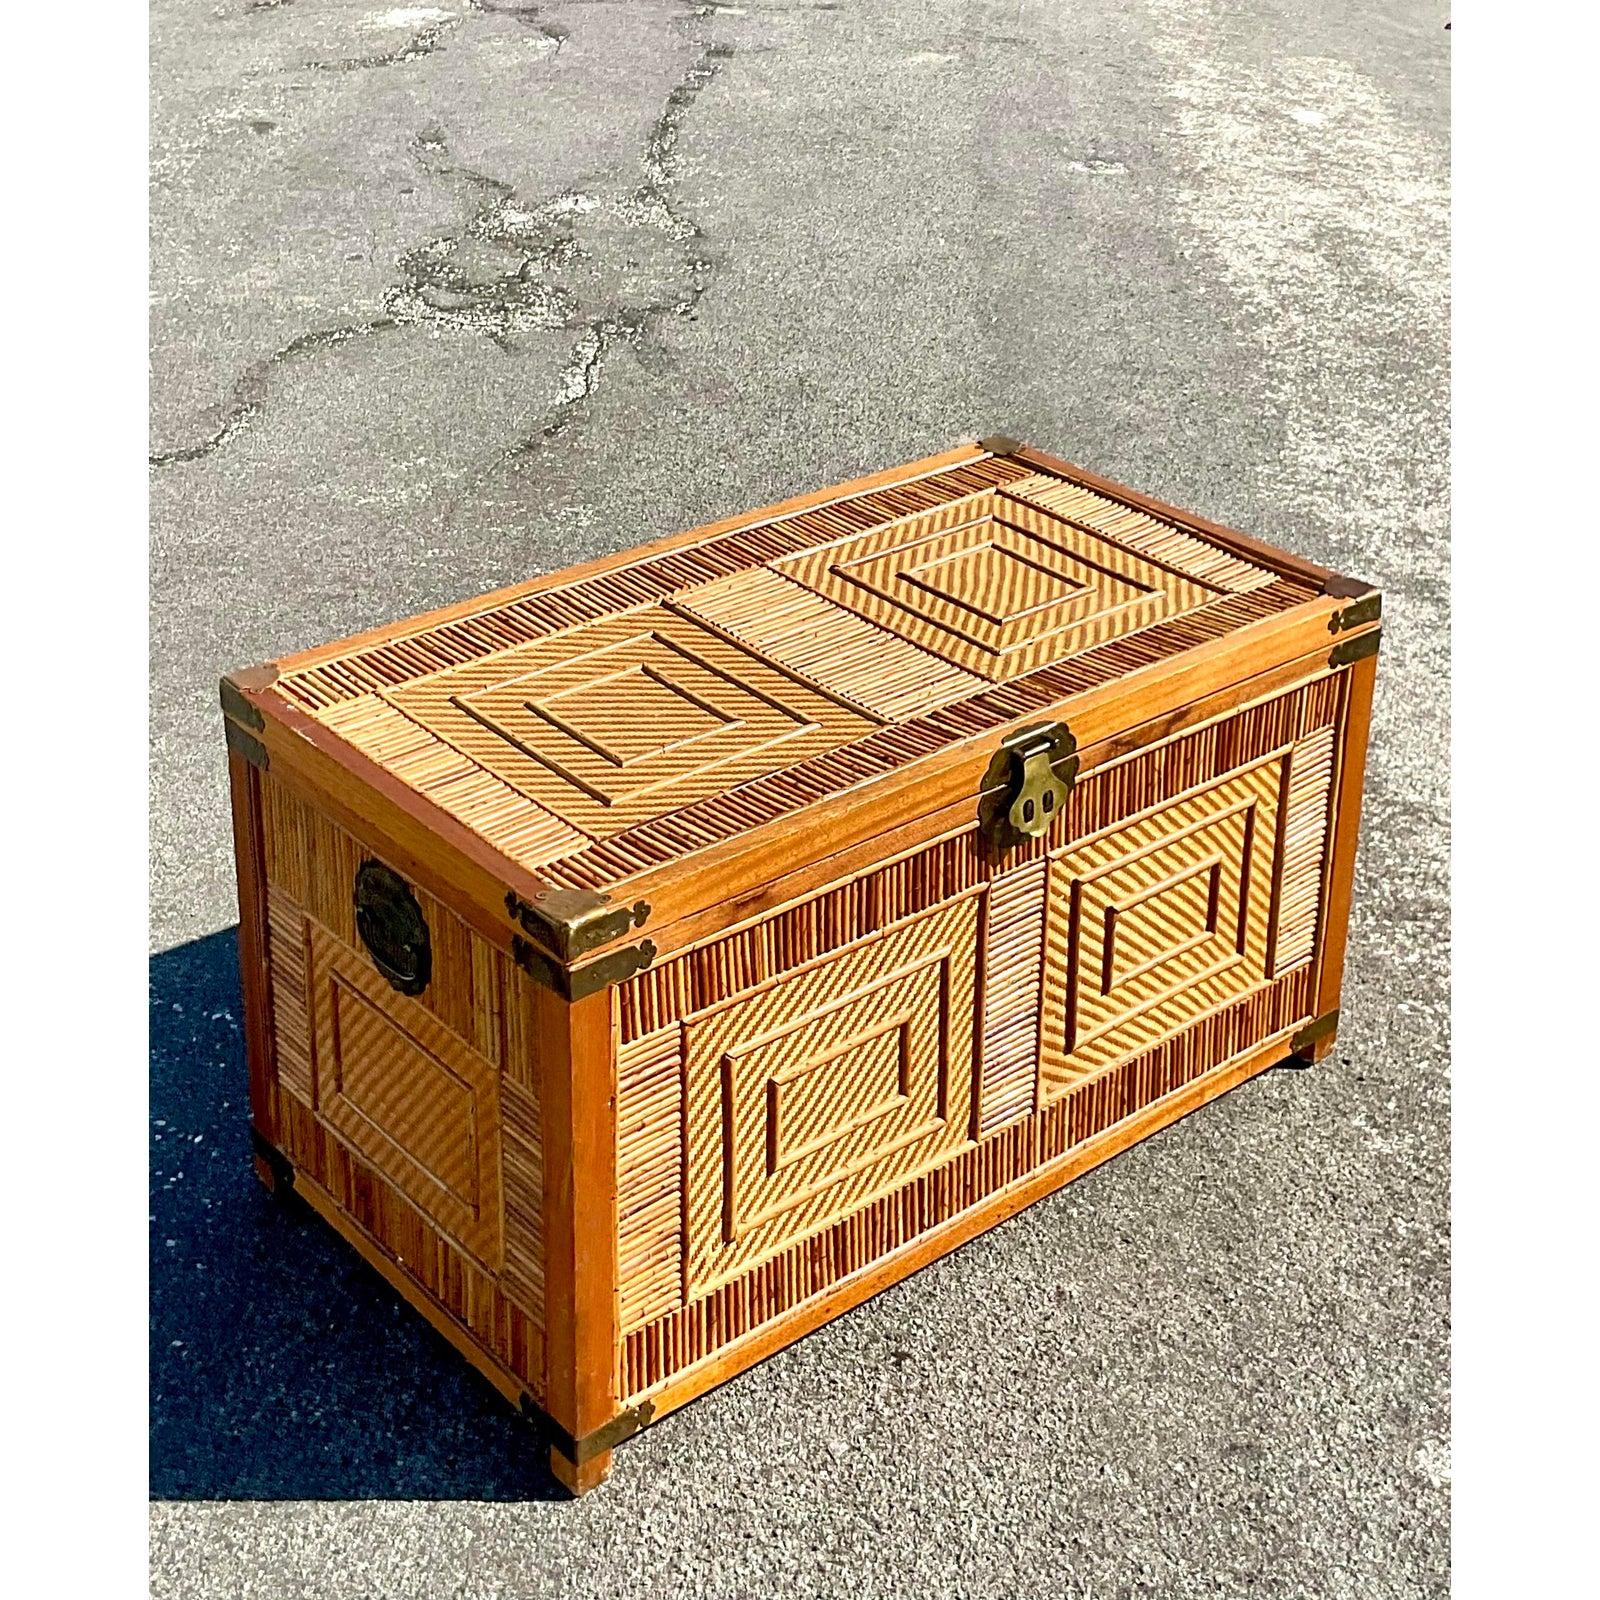 Fantastic vintage pencil reed trunk. Wood frame with inset reed panels. Hammered brass hardware. Acquired from a Palm Beach estate.